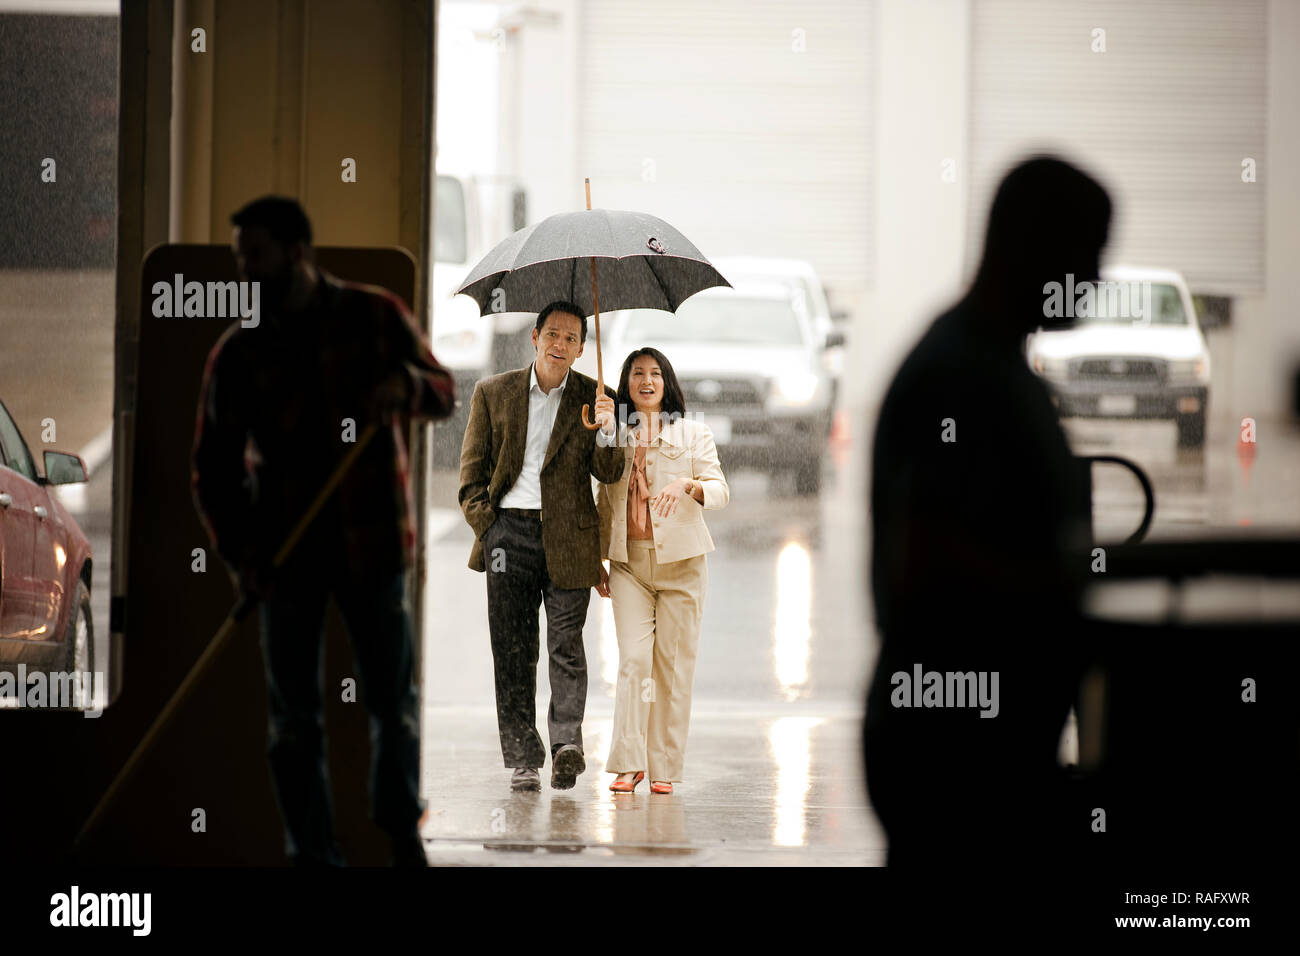 Businessman holding an umbrella for a colleague as they arrive at work. Stock Photo